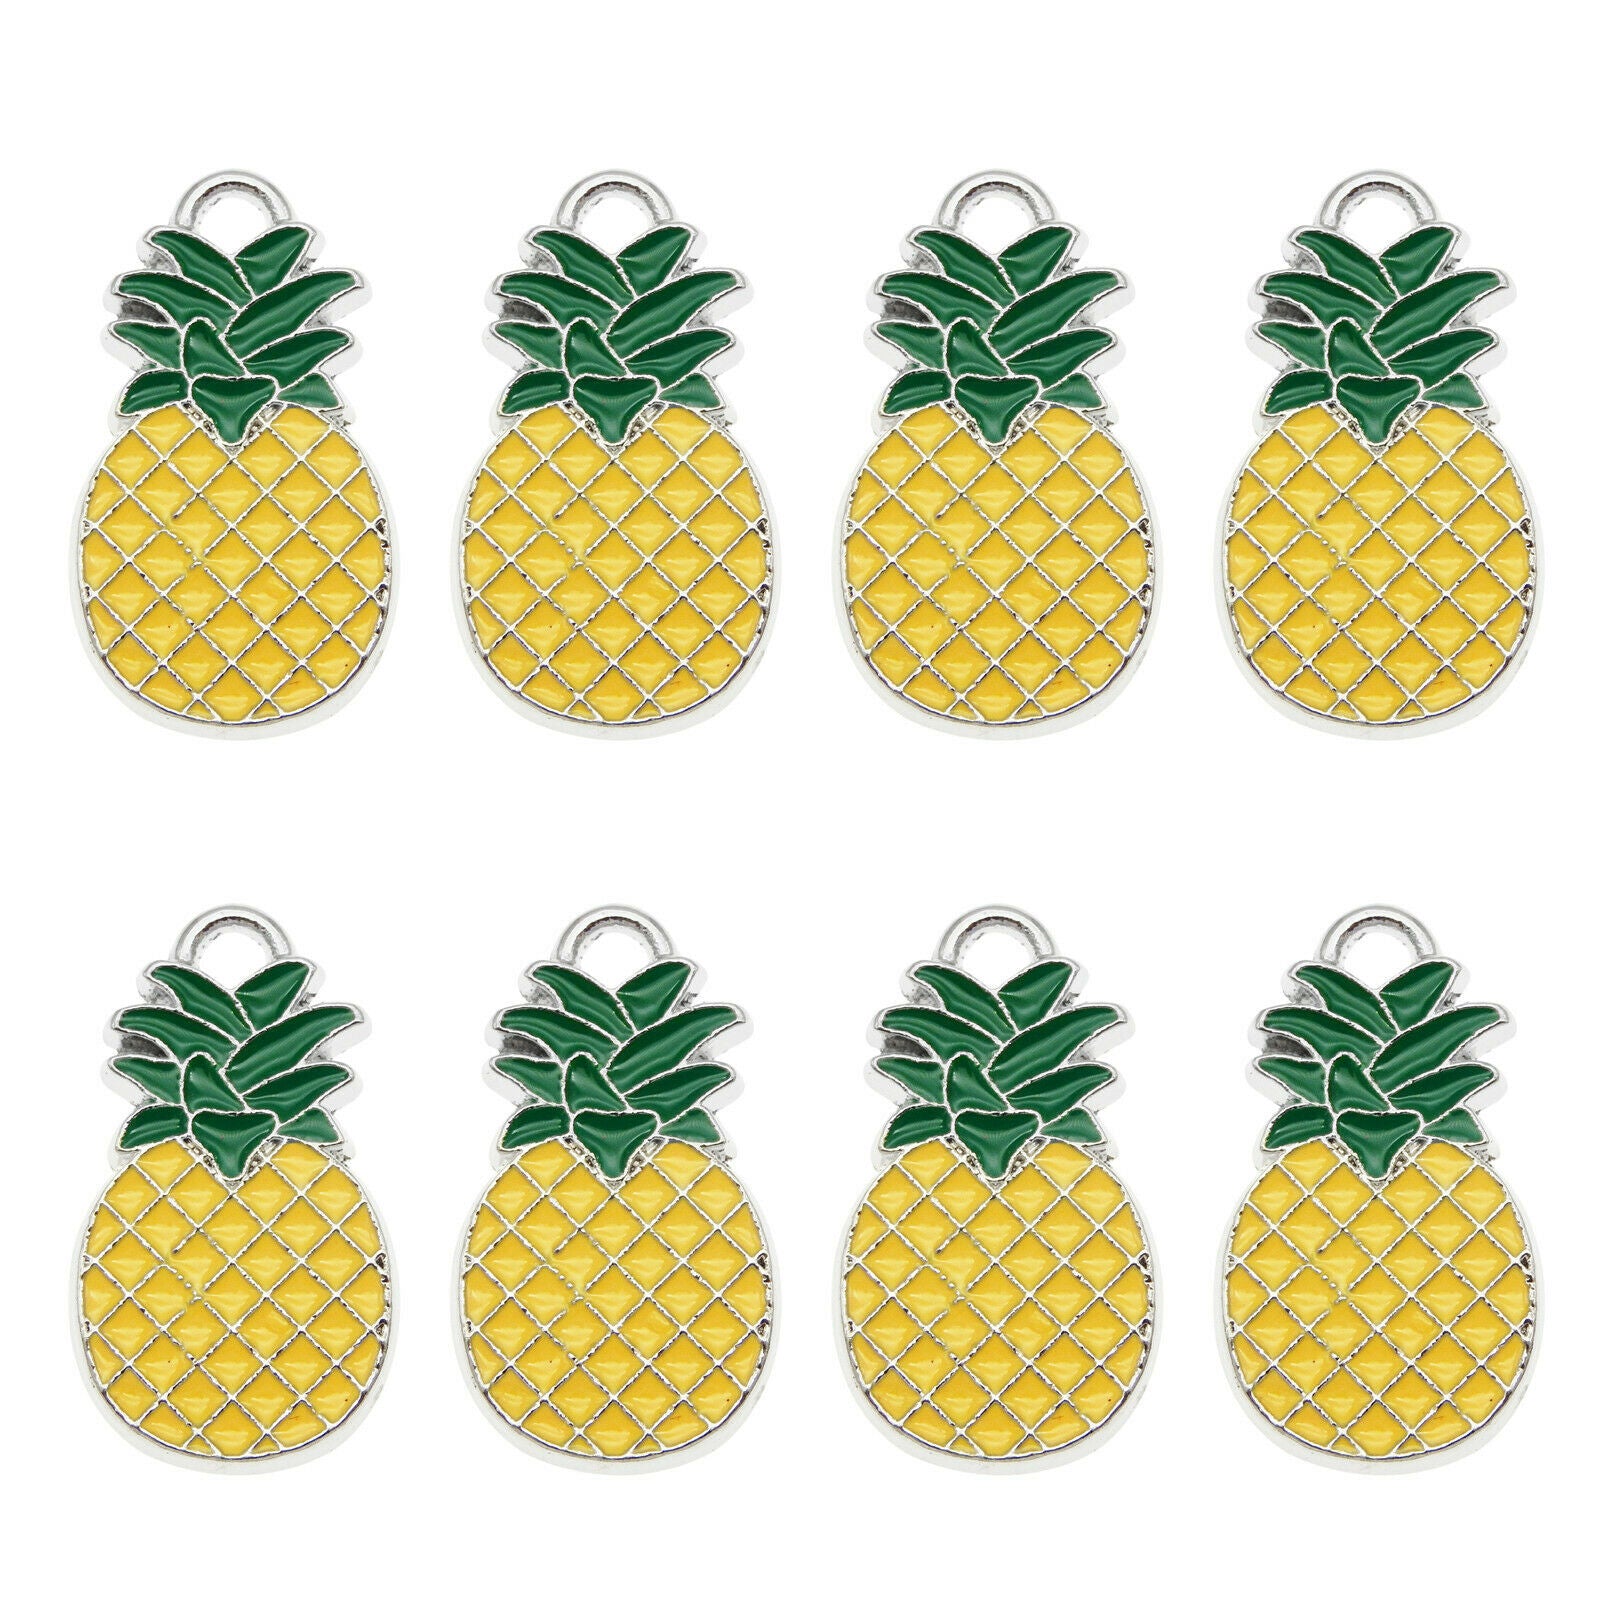 Wholesale Alloy Yellow Pineapple Design Pendant Charms Jewelry DIY Crafts 15pcs